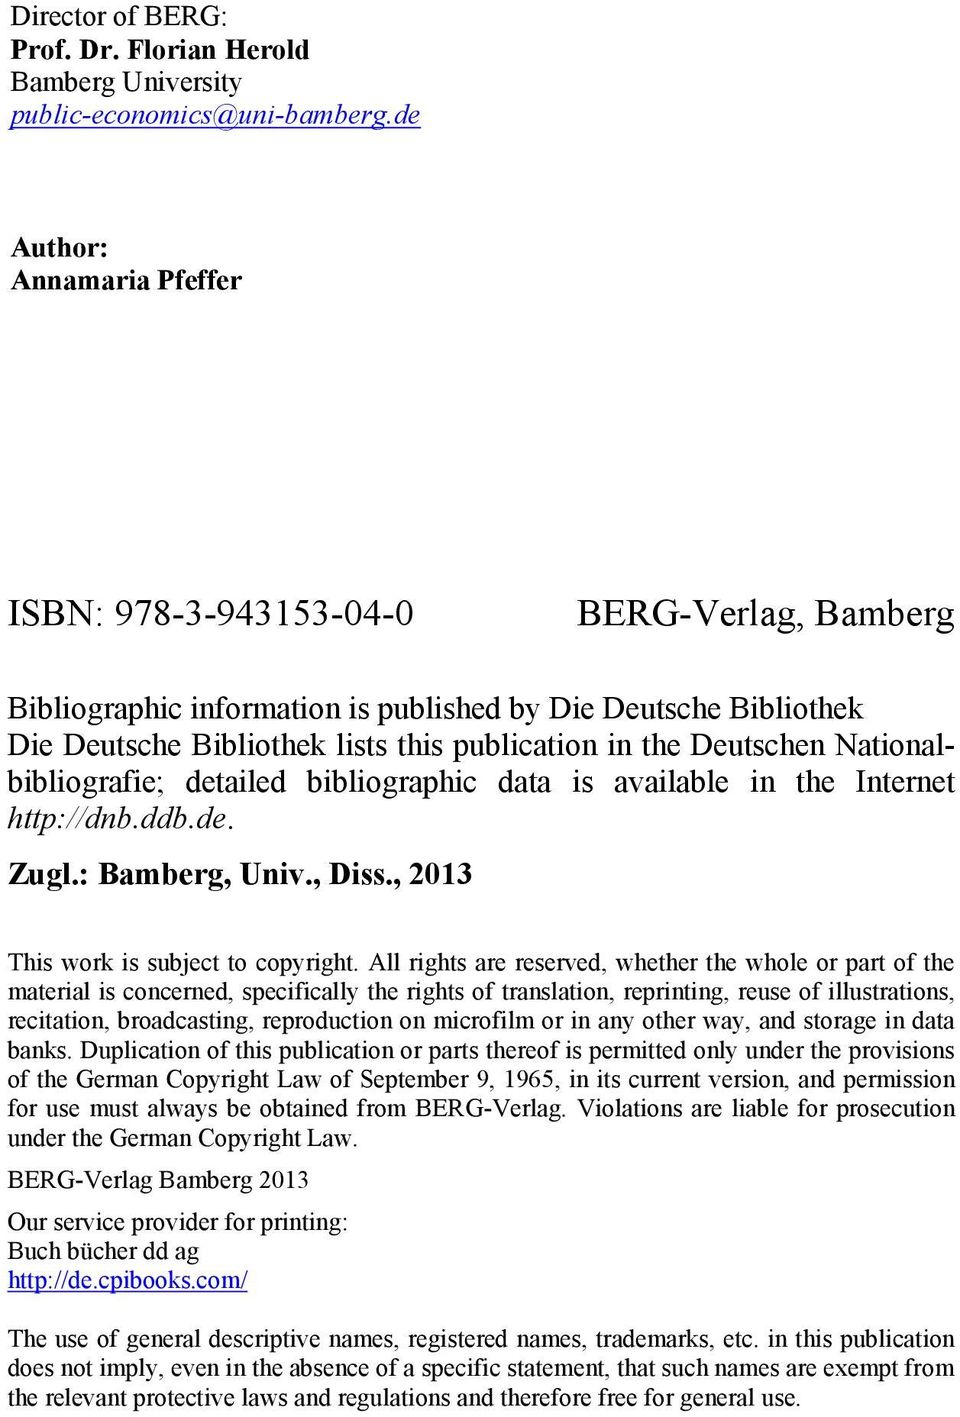 Deutschen Nationalbibliografie; detailed bibliographic data is available in the Internet http://dnb.ddb.de. Zugl.: Bamberg, Univ., Diss., 2013 This work is subject to copyright.